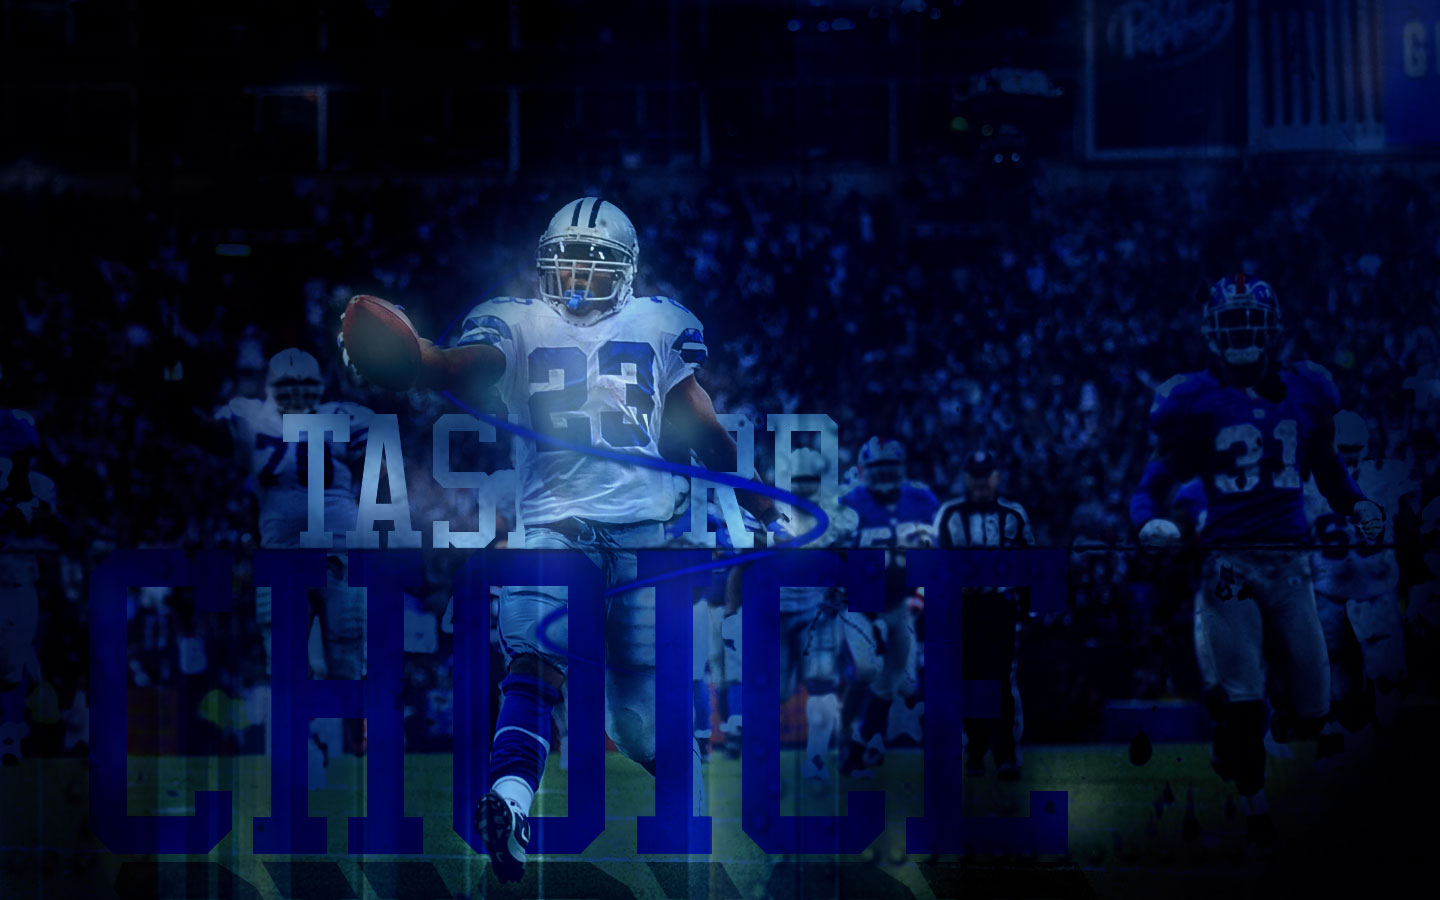 An Awesome Image Of Dallas Cowboys Wallpaper Alhomat Magz